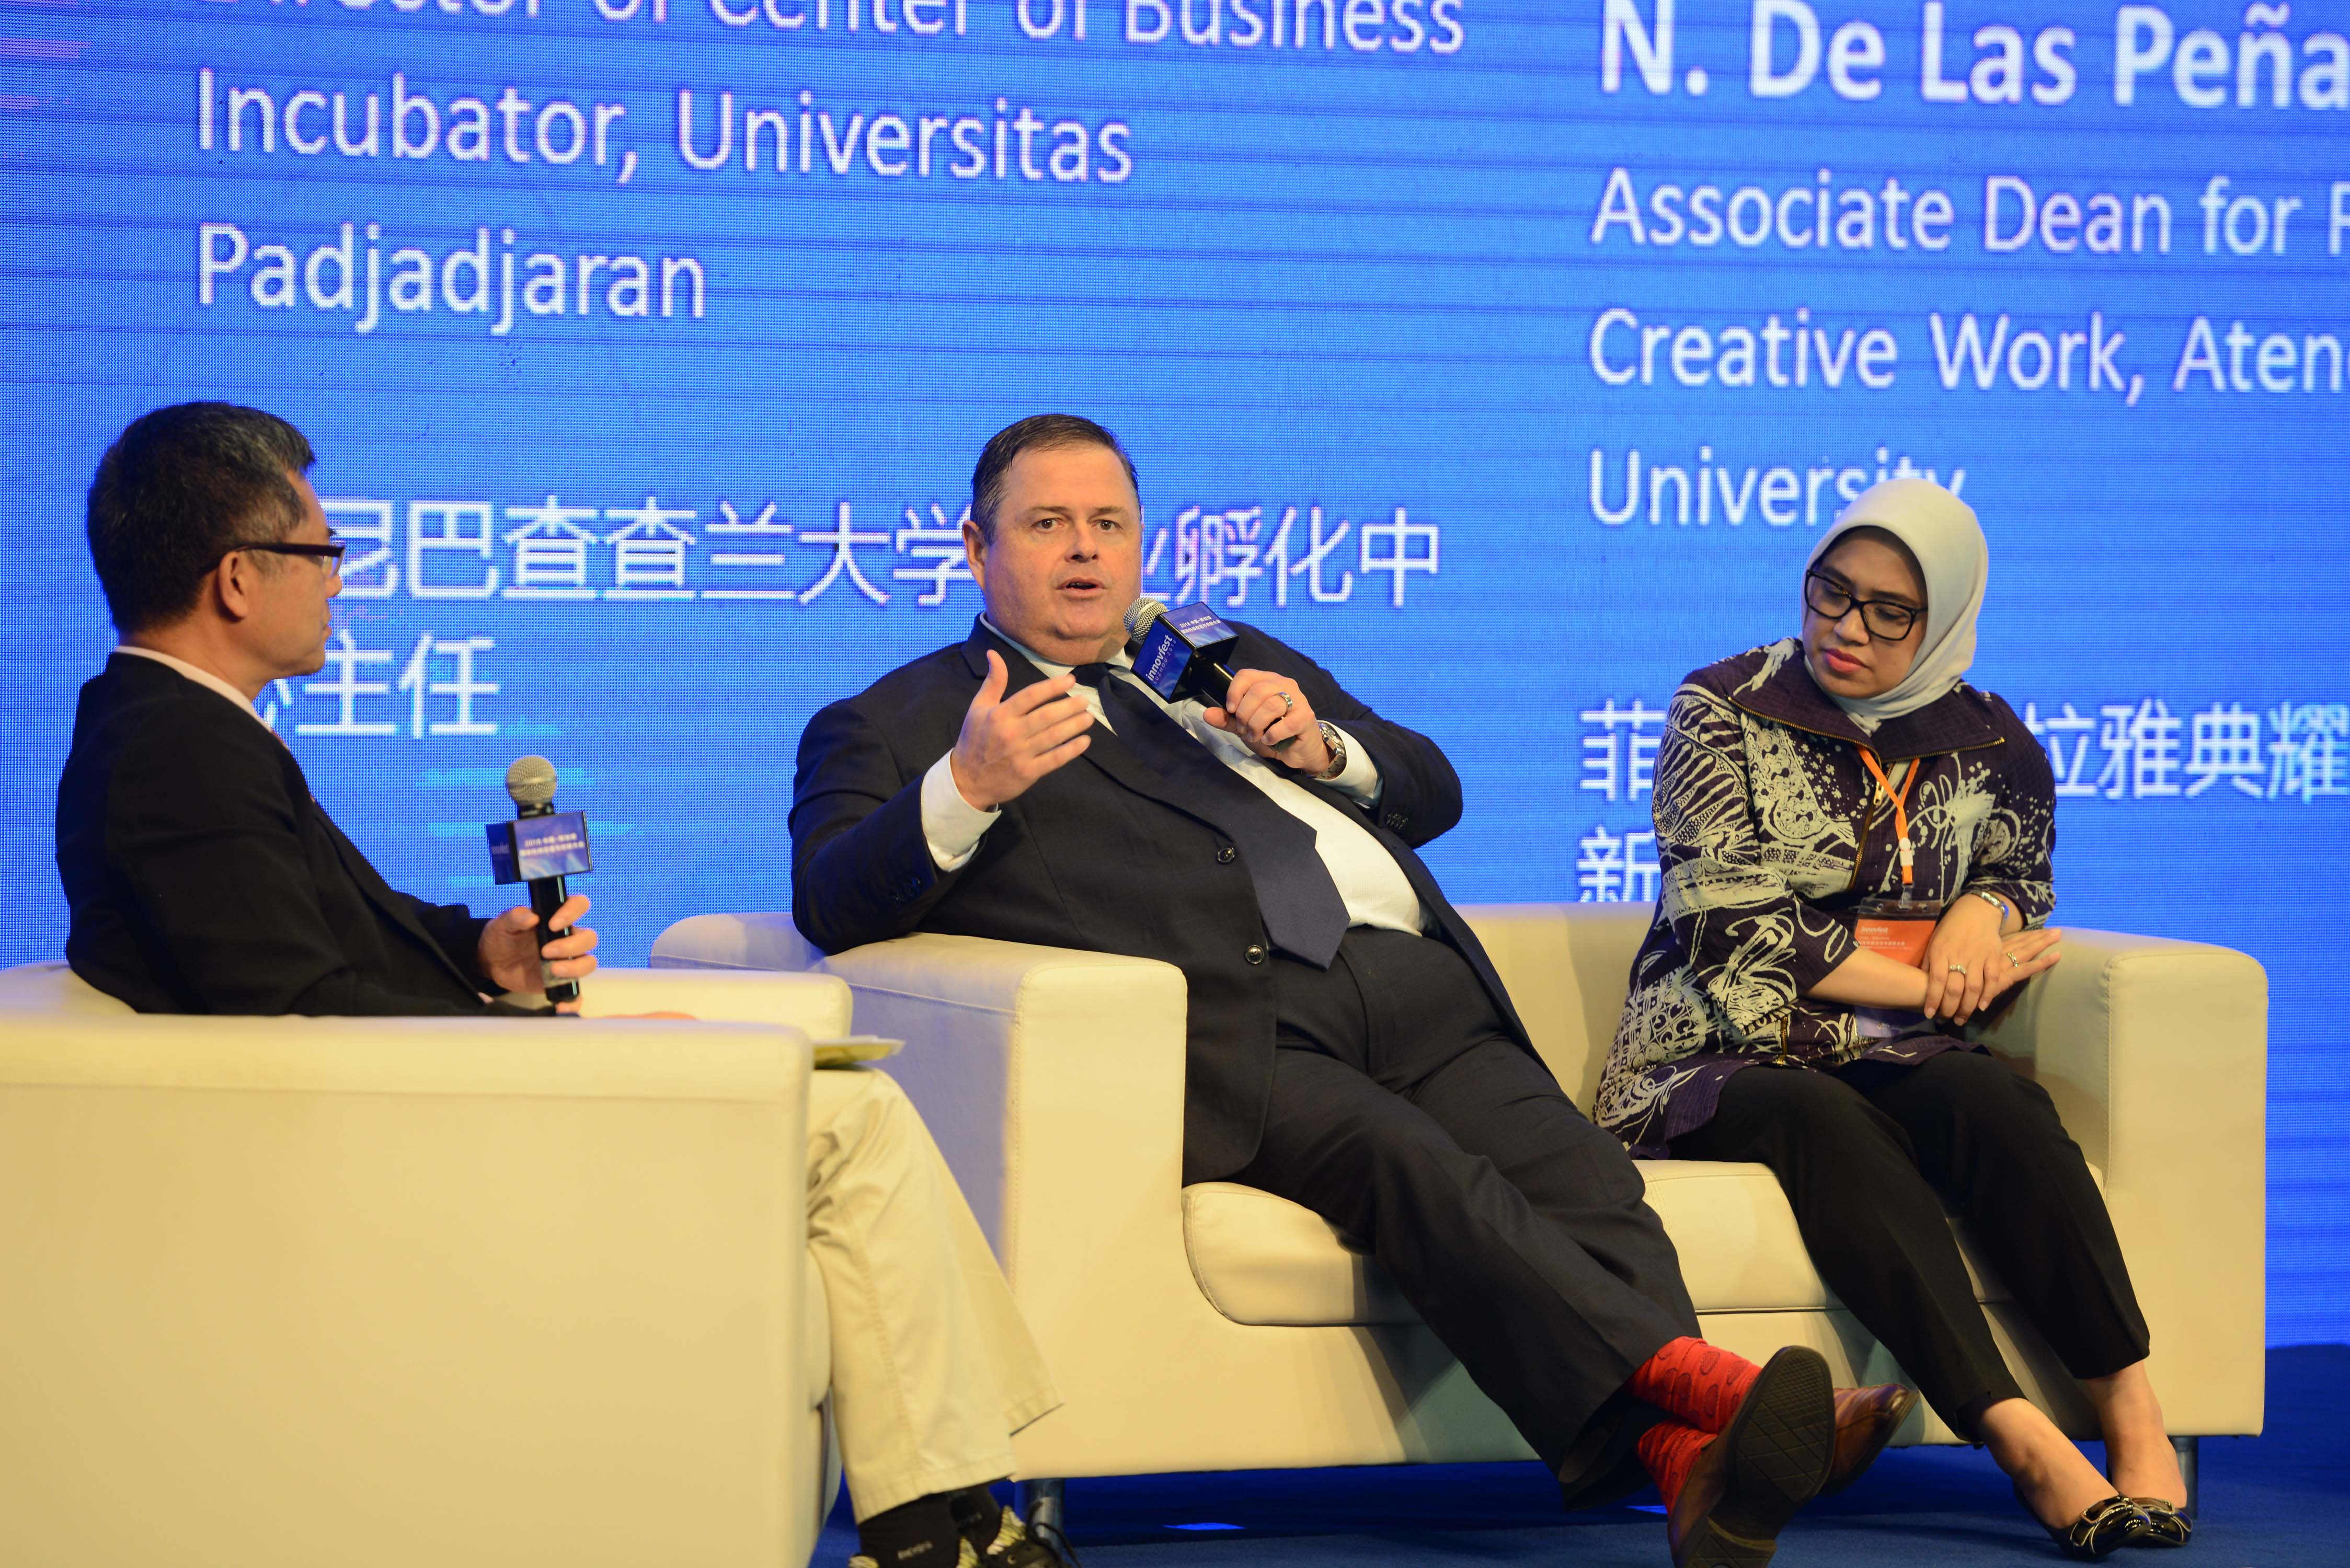 Event Review | Innovfest Suzhou 2018 was successfully conducted at NUSRI